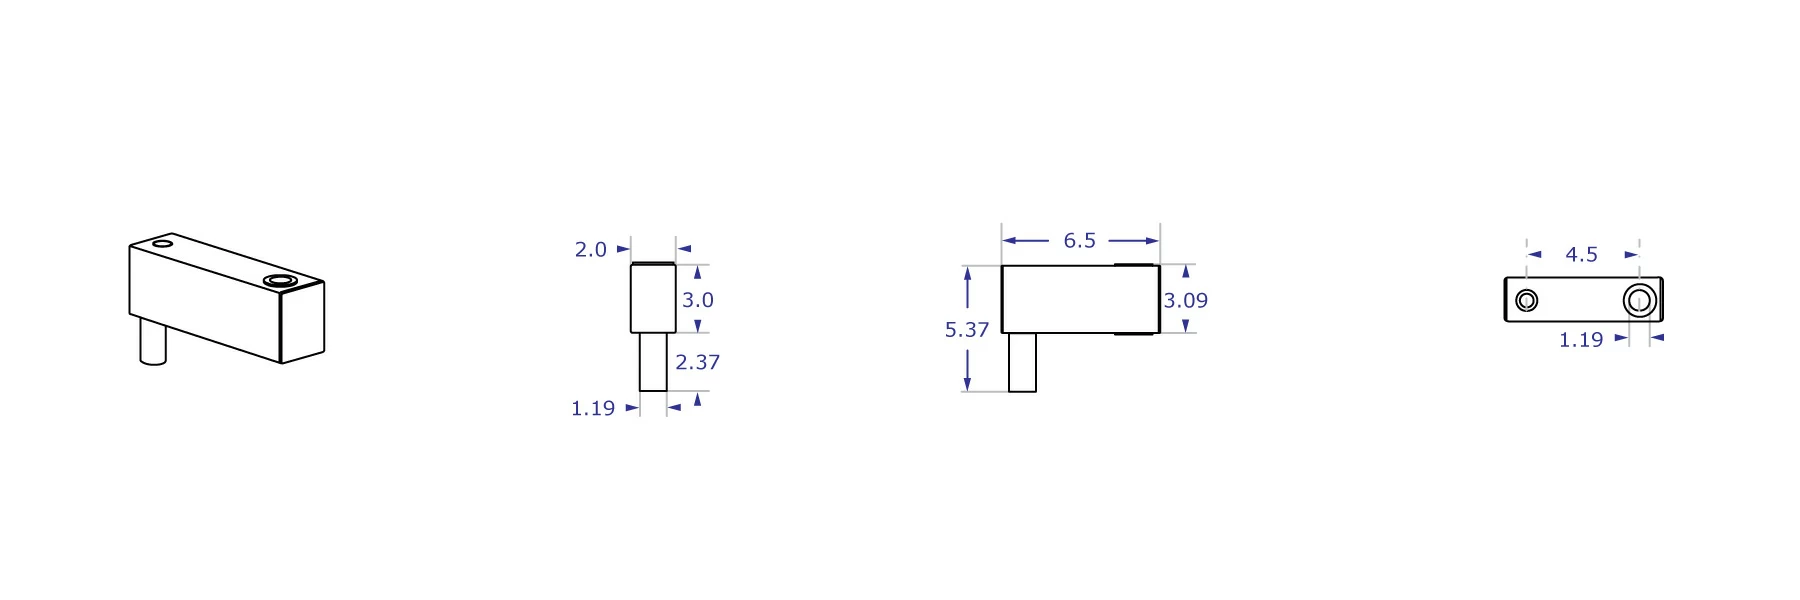 HDEXT 4.5 inch single pin heavy-duty extension specification drawings showing measurements for front, side and top views